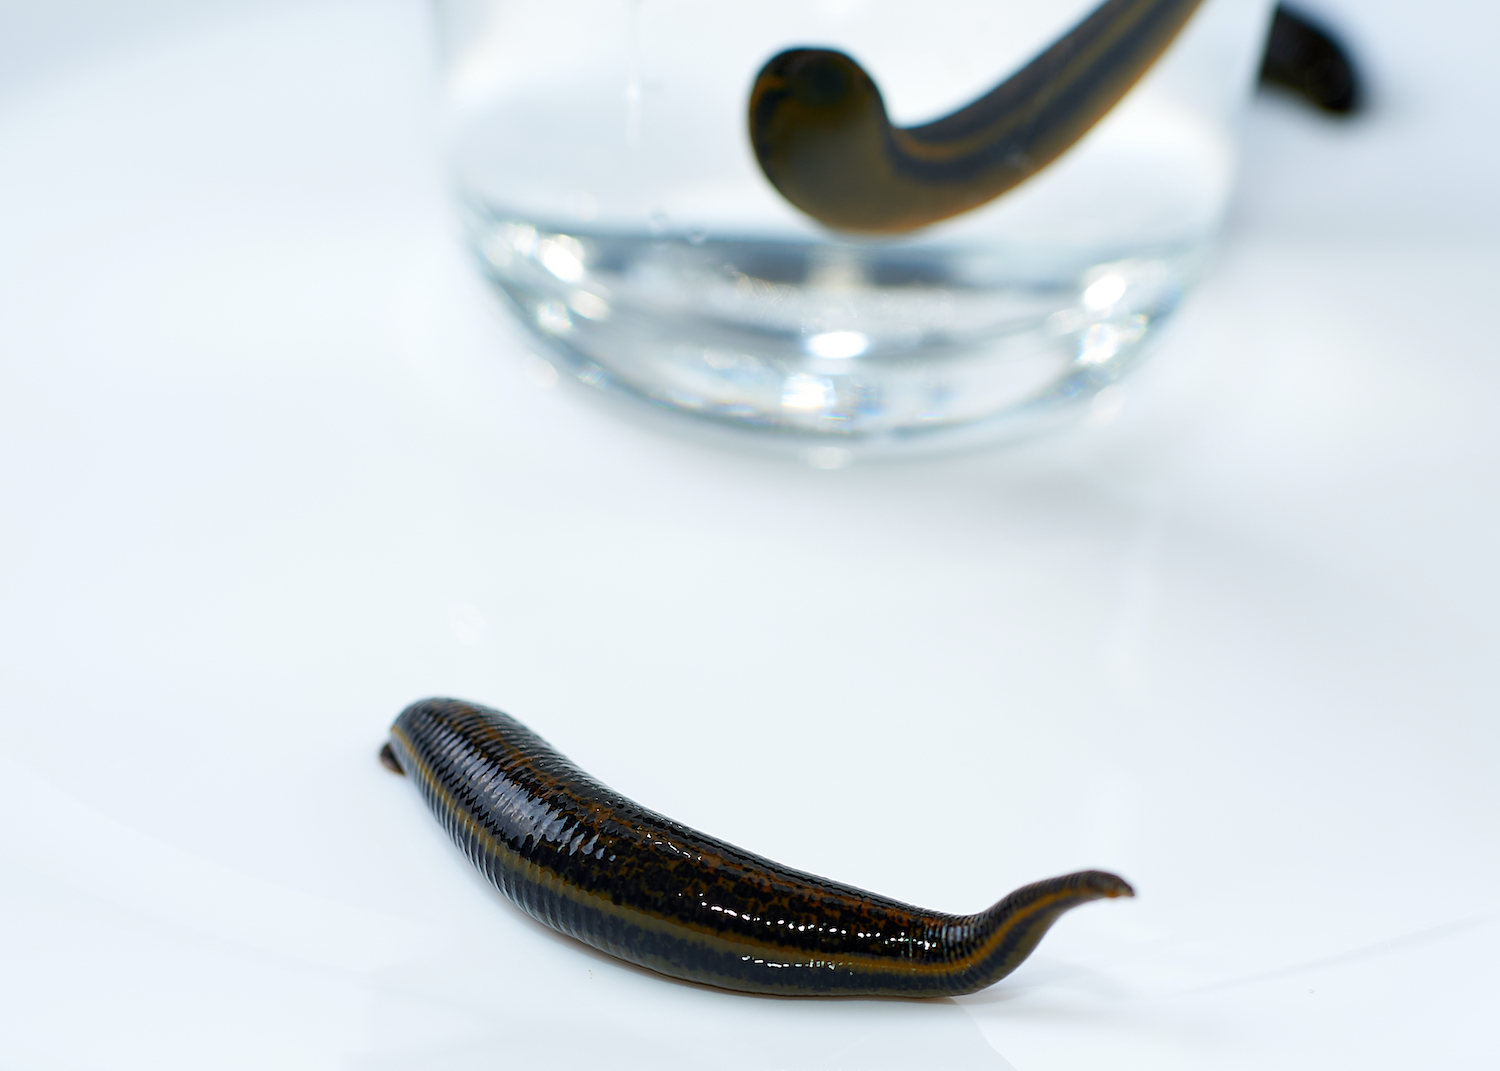 Where to get leeches and what to pay attention to?